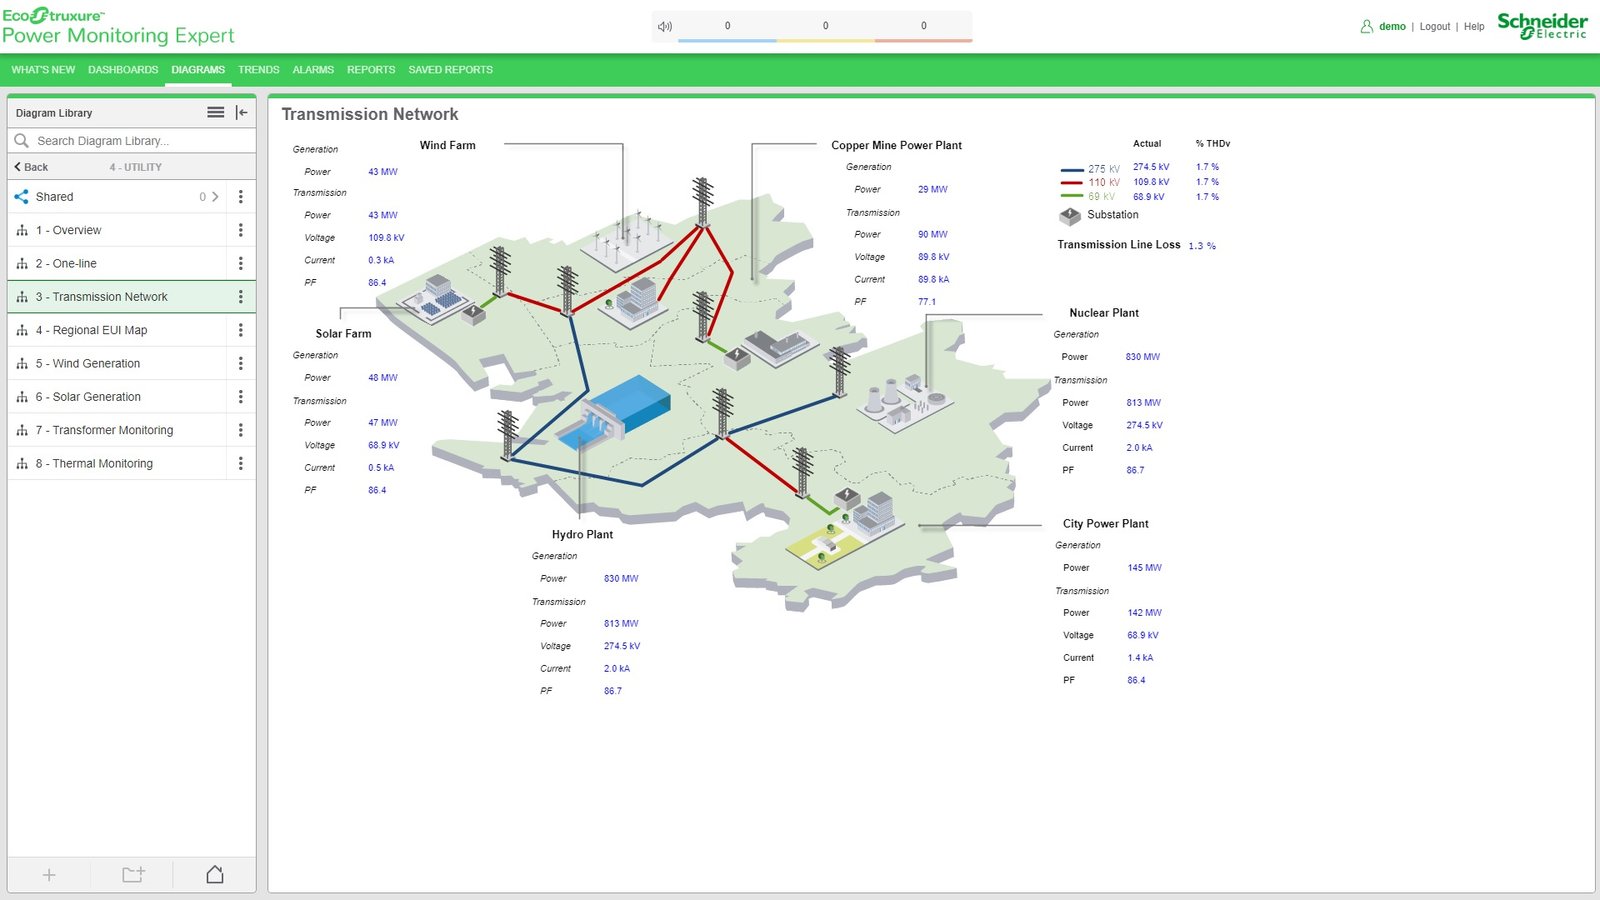 TechiesEC collaborated in the new online demo of the Power Monitoring Expert v2020 Schneider Electric’s software